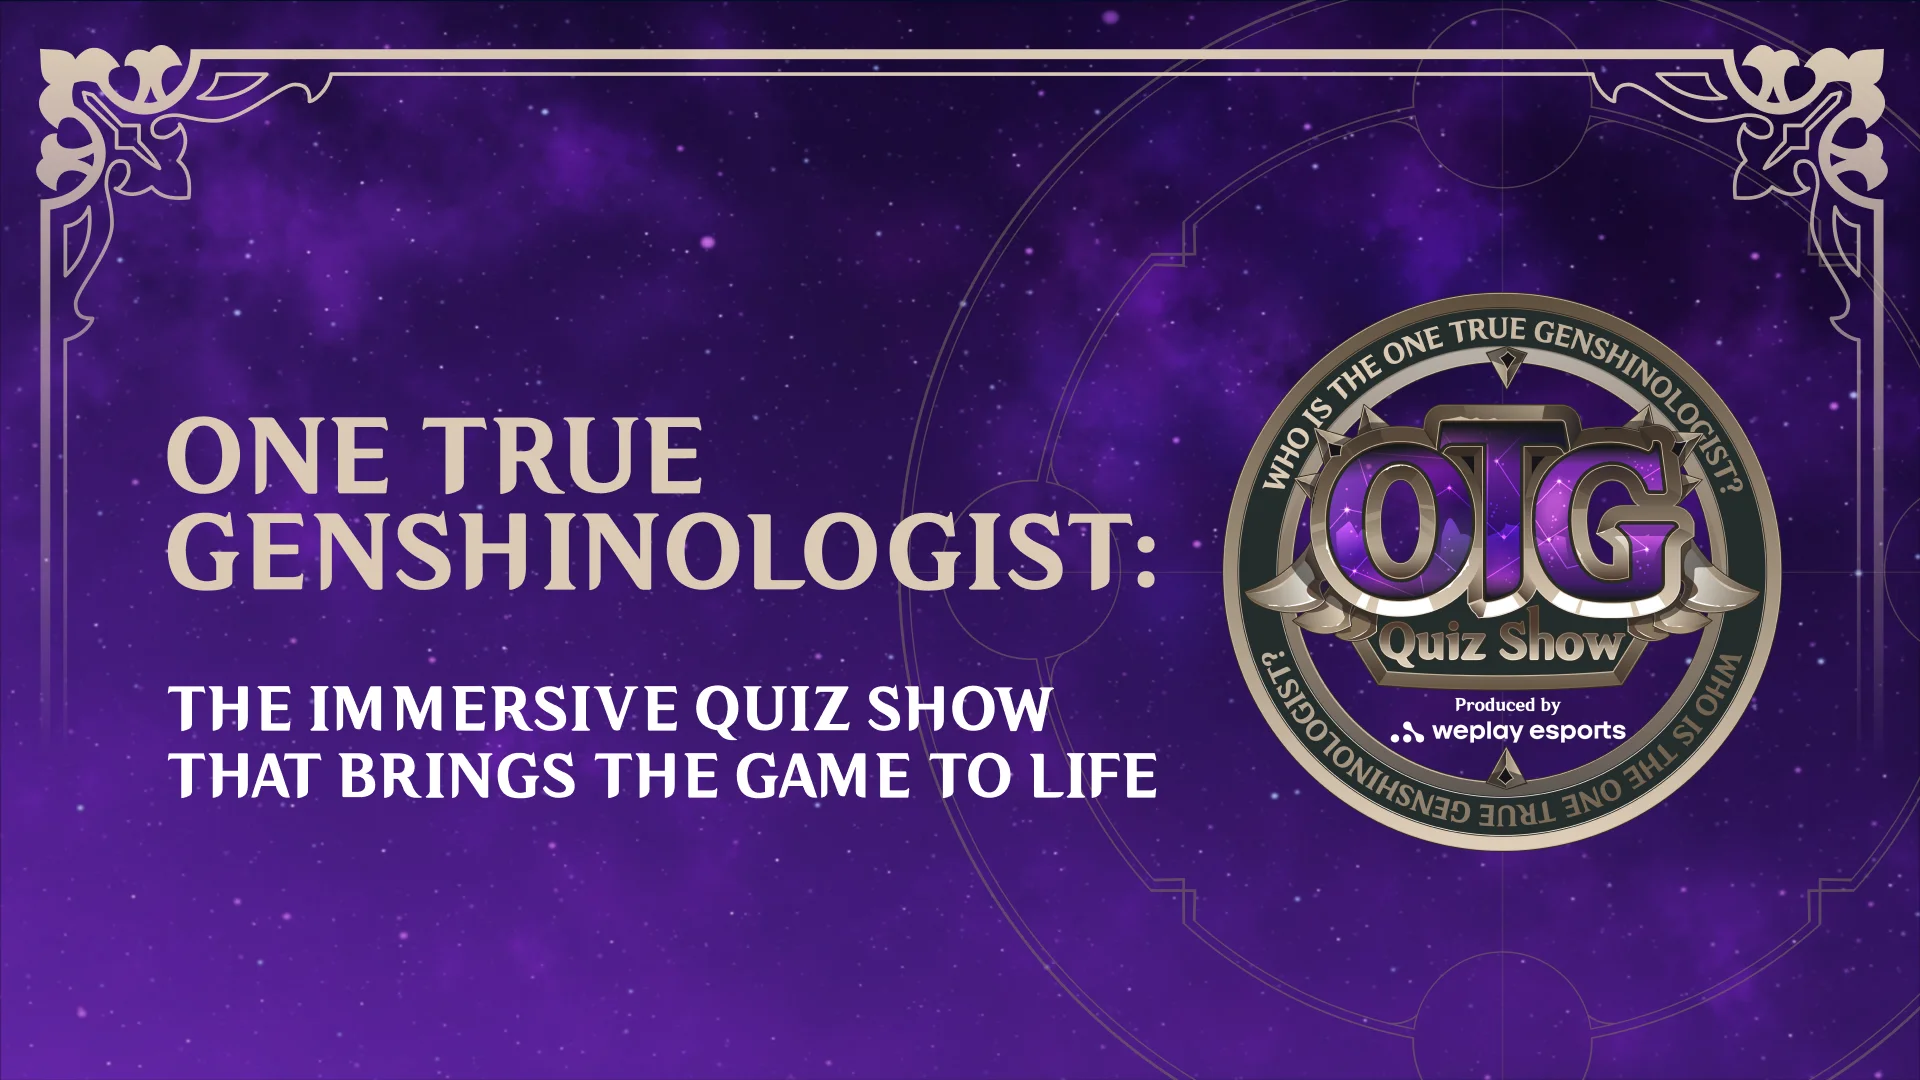 One True Genshinologist: The immersive quiz show that brings the game to life. Credit: WePlay Holding